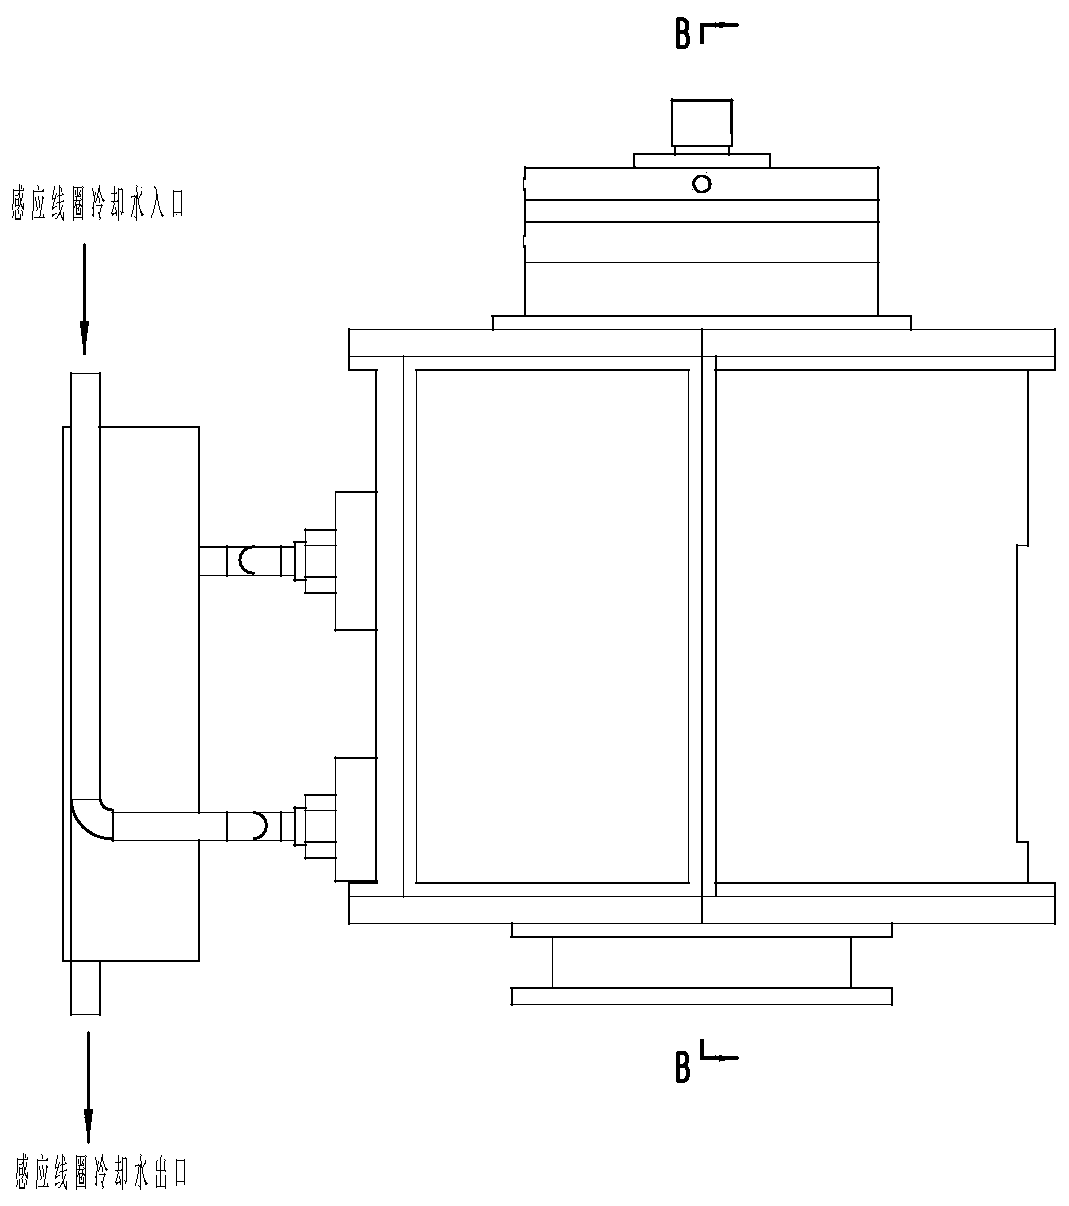 A High Frequency Induction Plasma Heating Wind Tunnel